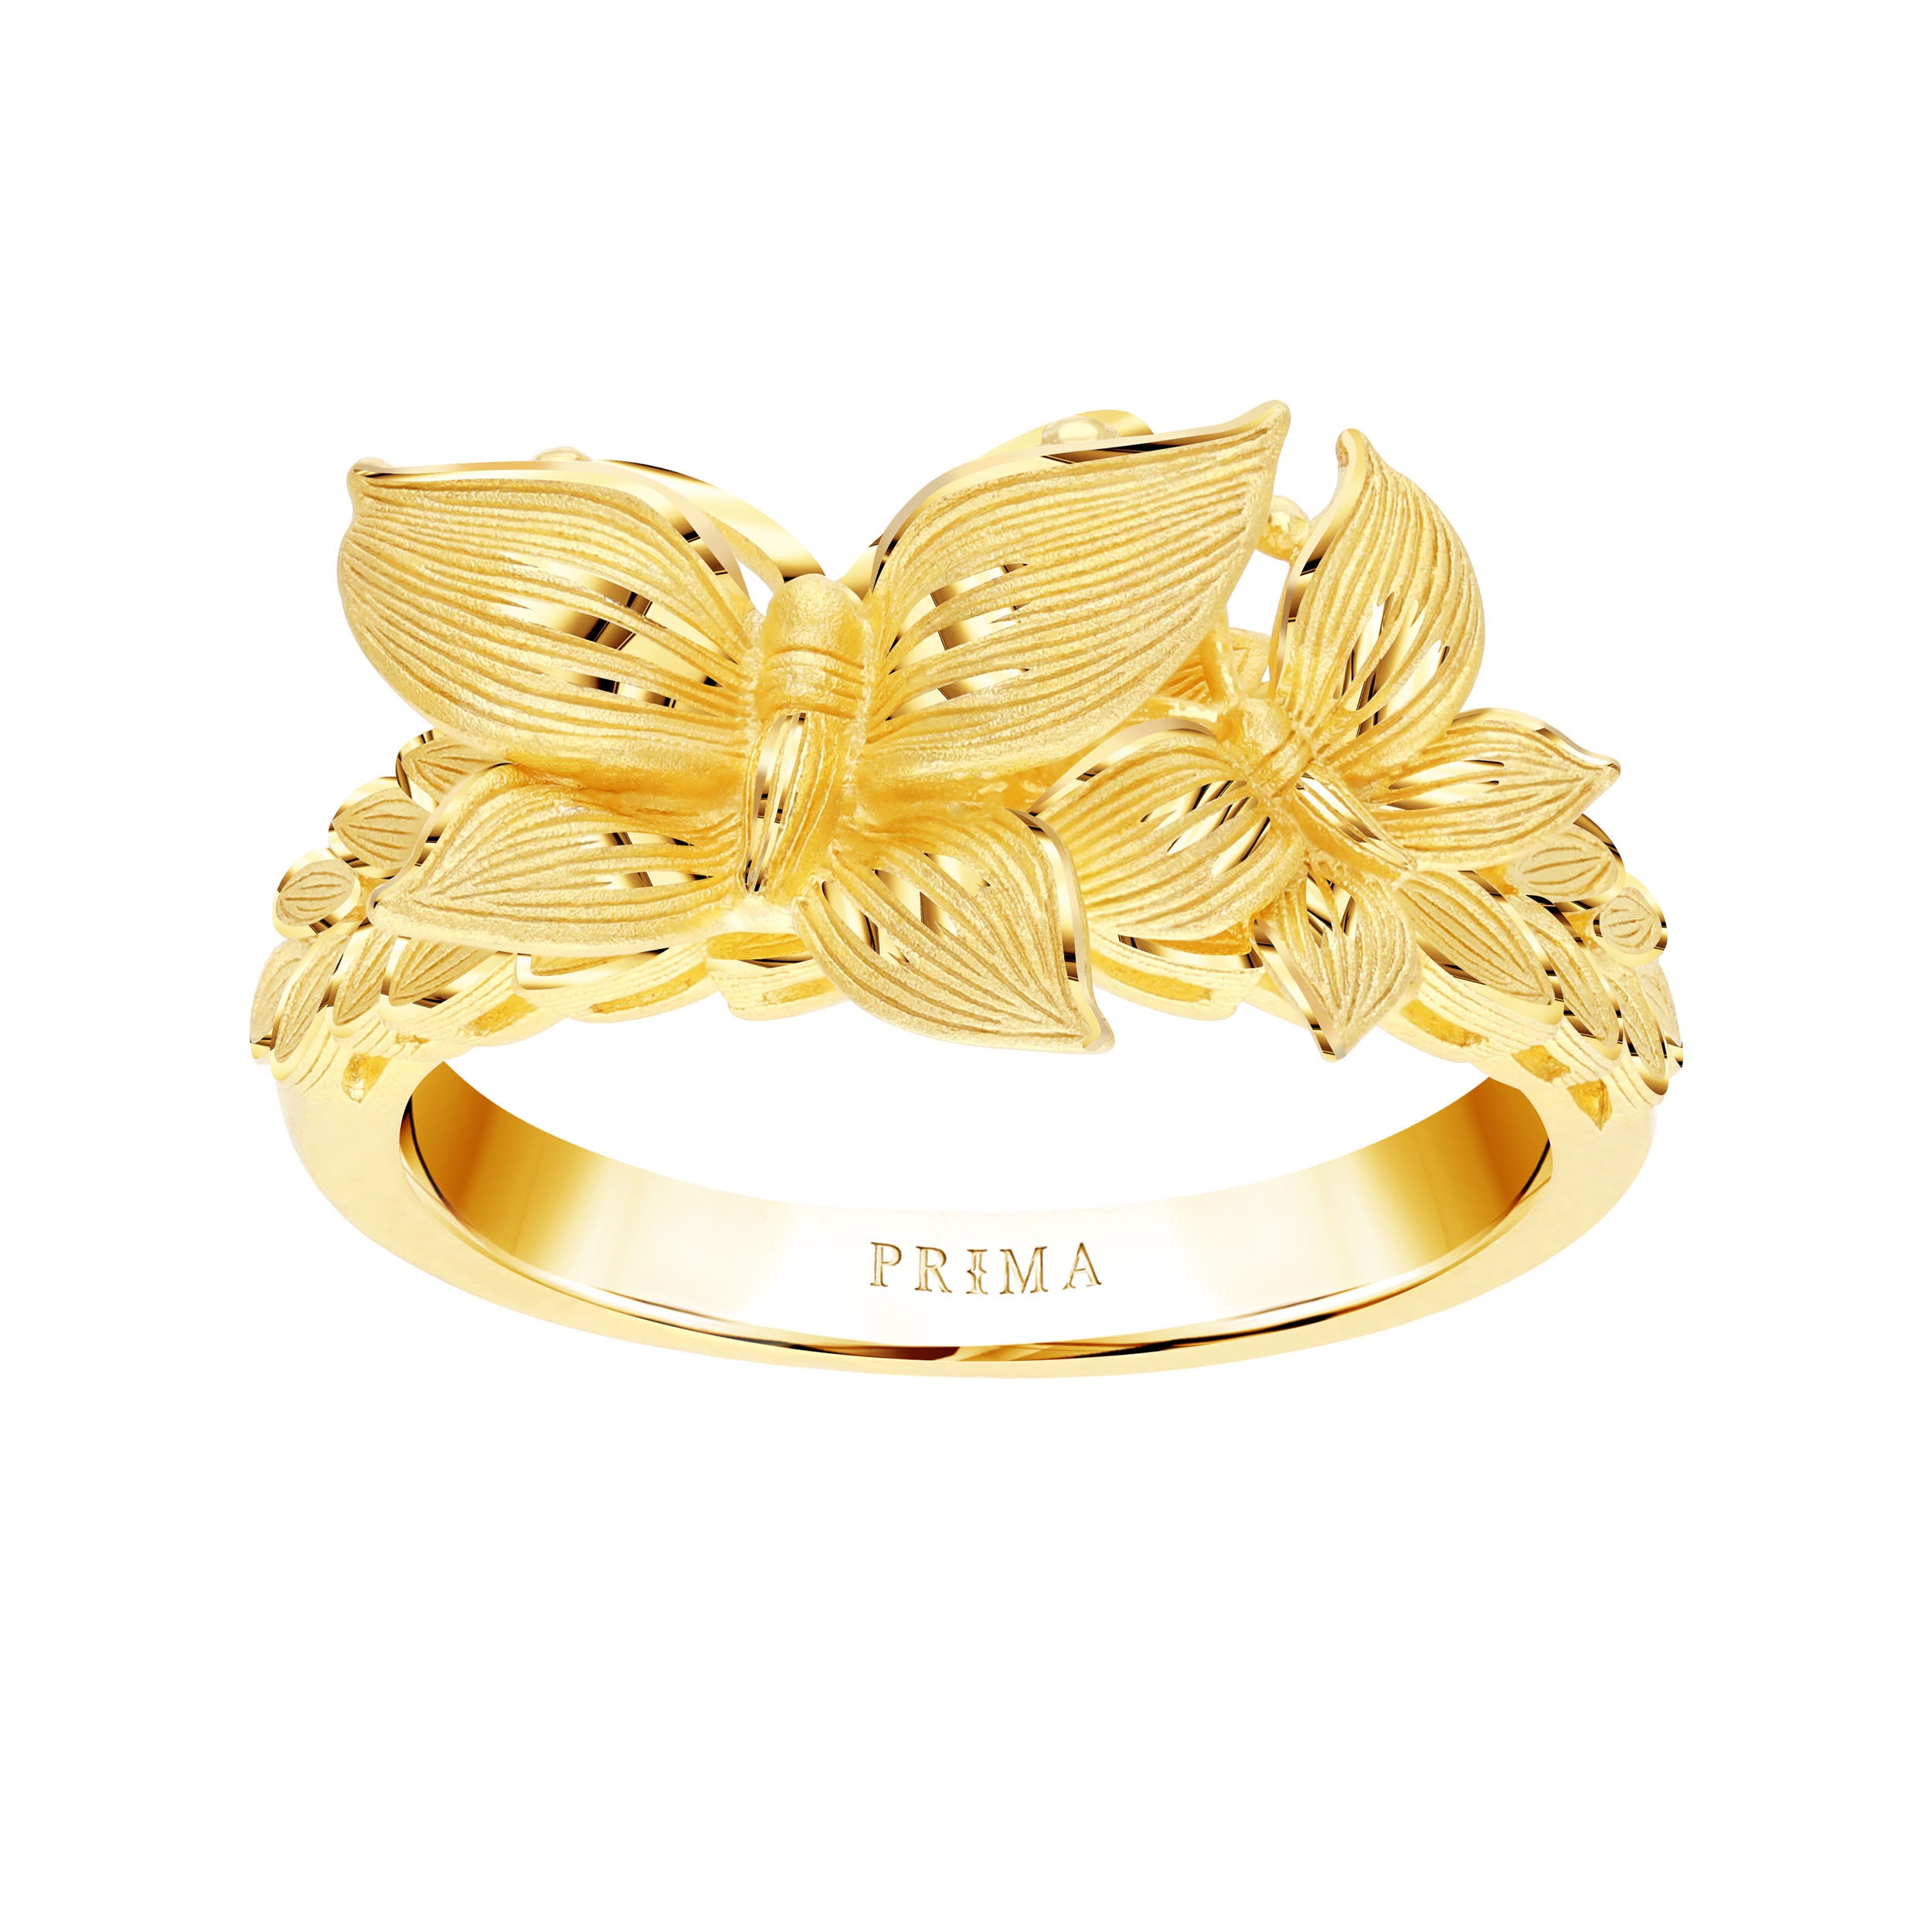 ANIID Ethiopia Dubai Flower Gold Color Arab 24k Gold Wedding Ring Resizable  Wedding Jewelry For Women, African Party Gift, Nigerian Jewellery 230828  From Hui05, $8.89 | DHgate.Com